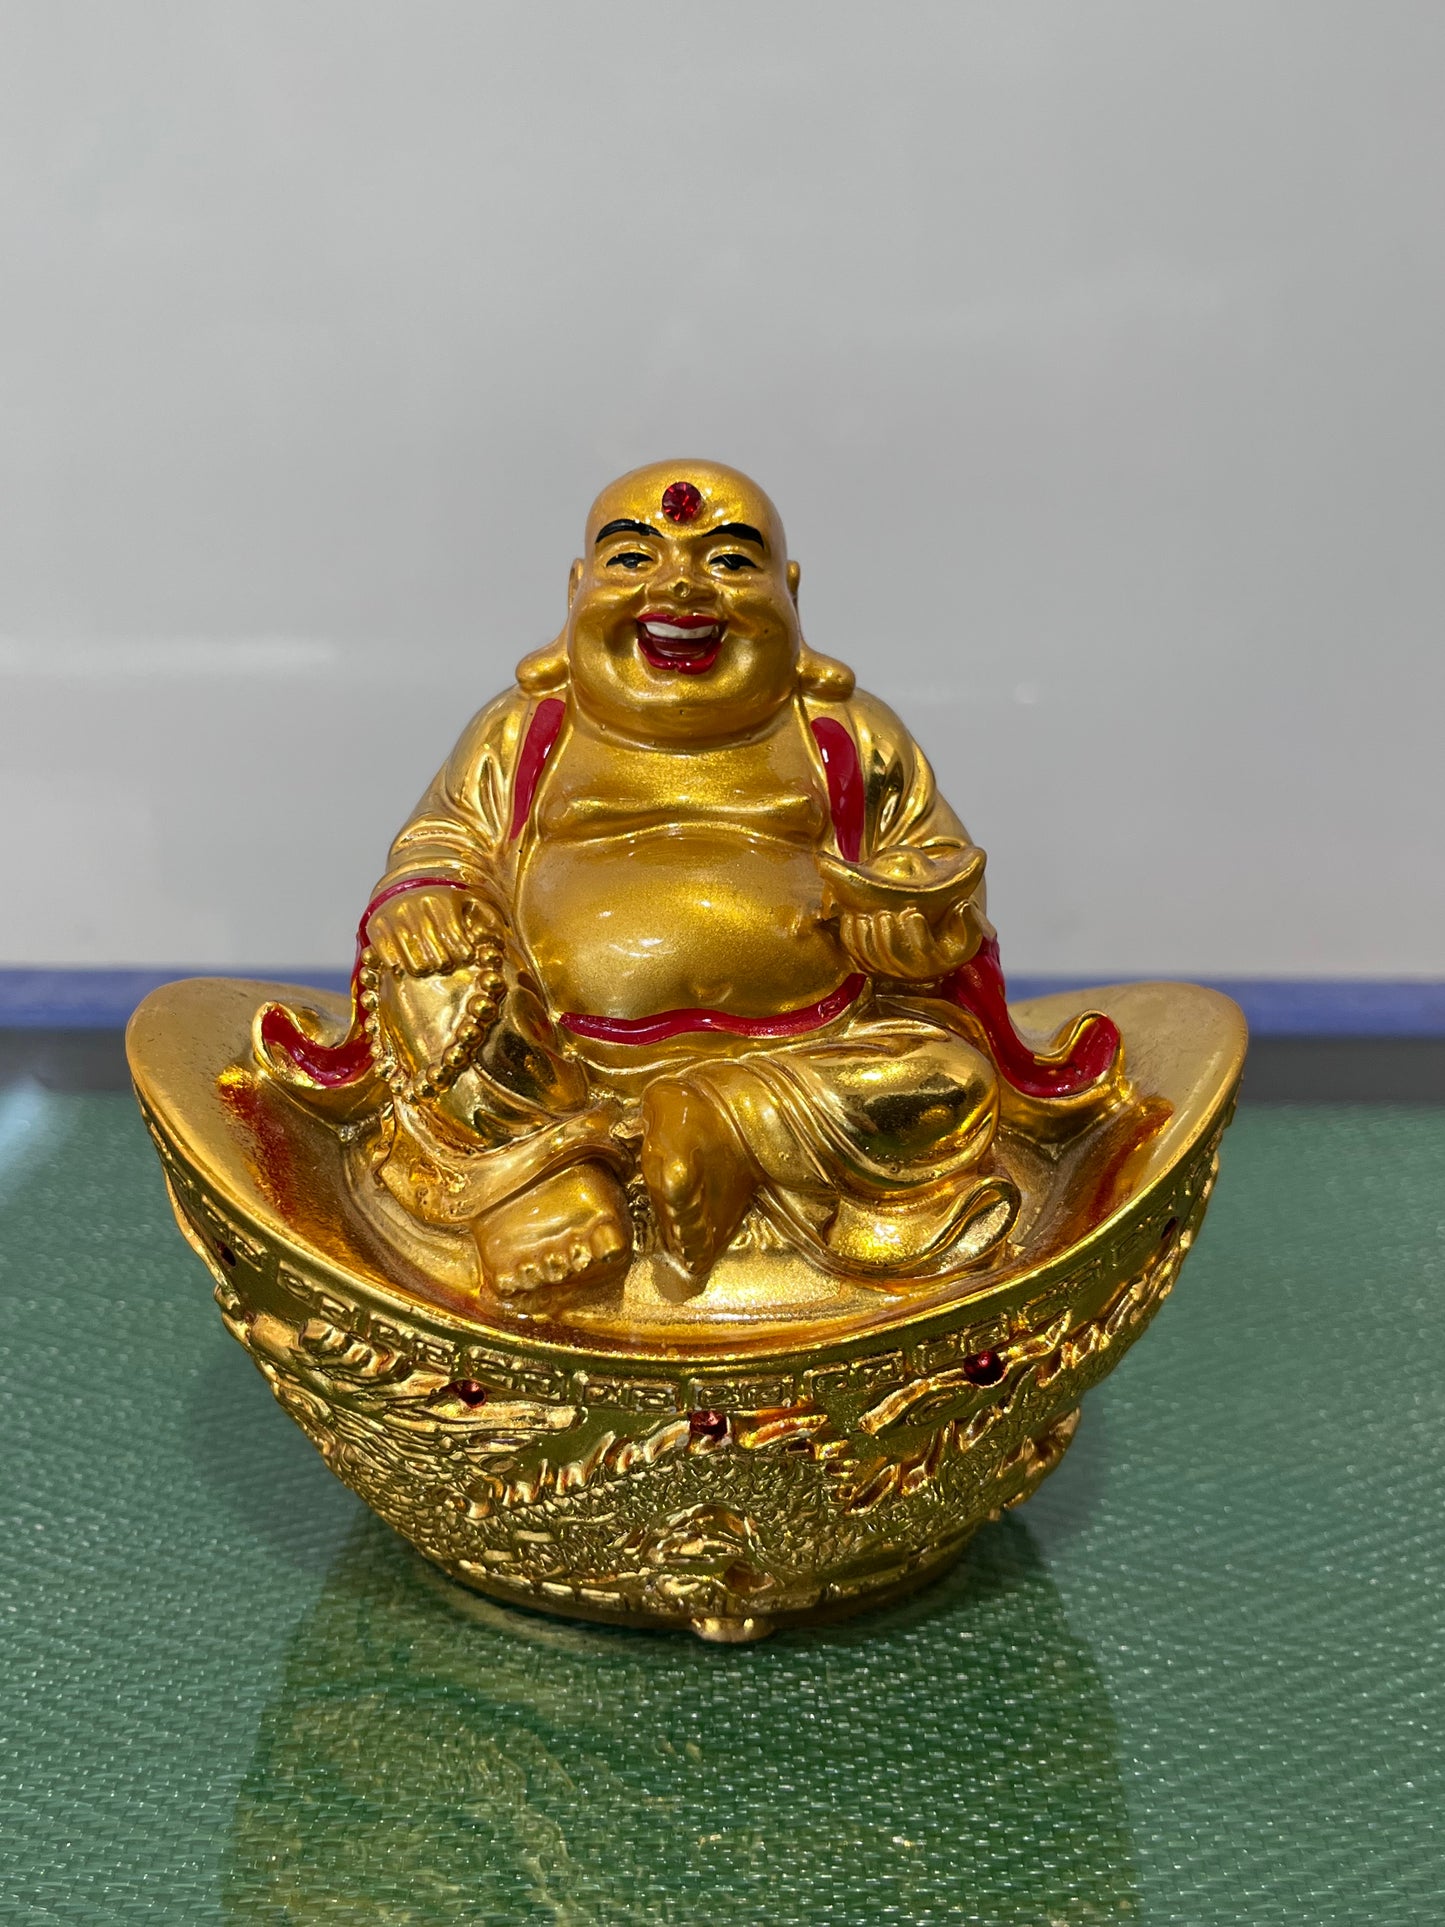 Golden Buddha with smile